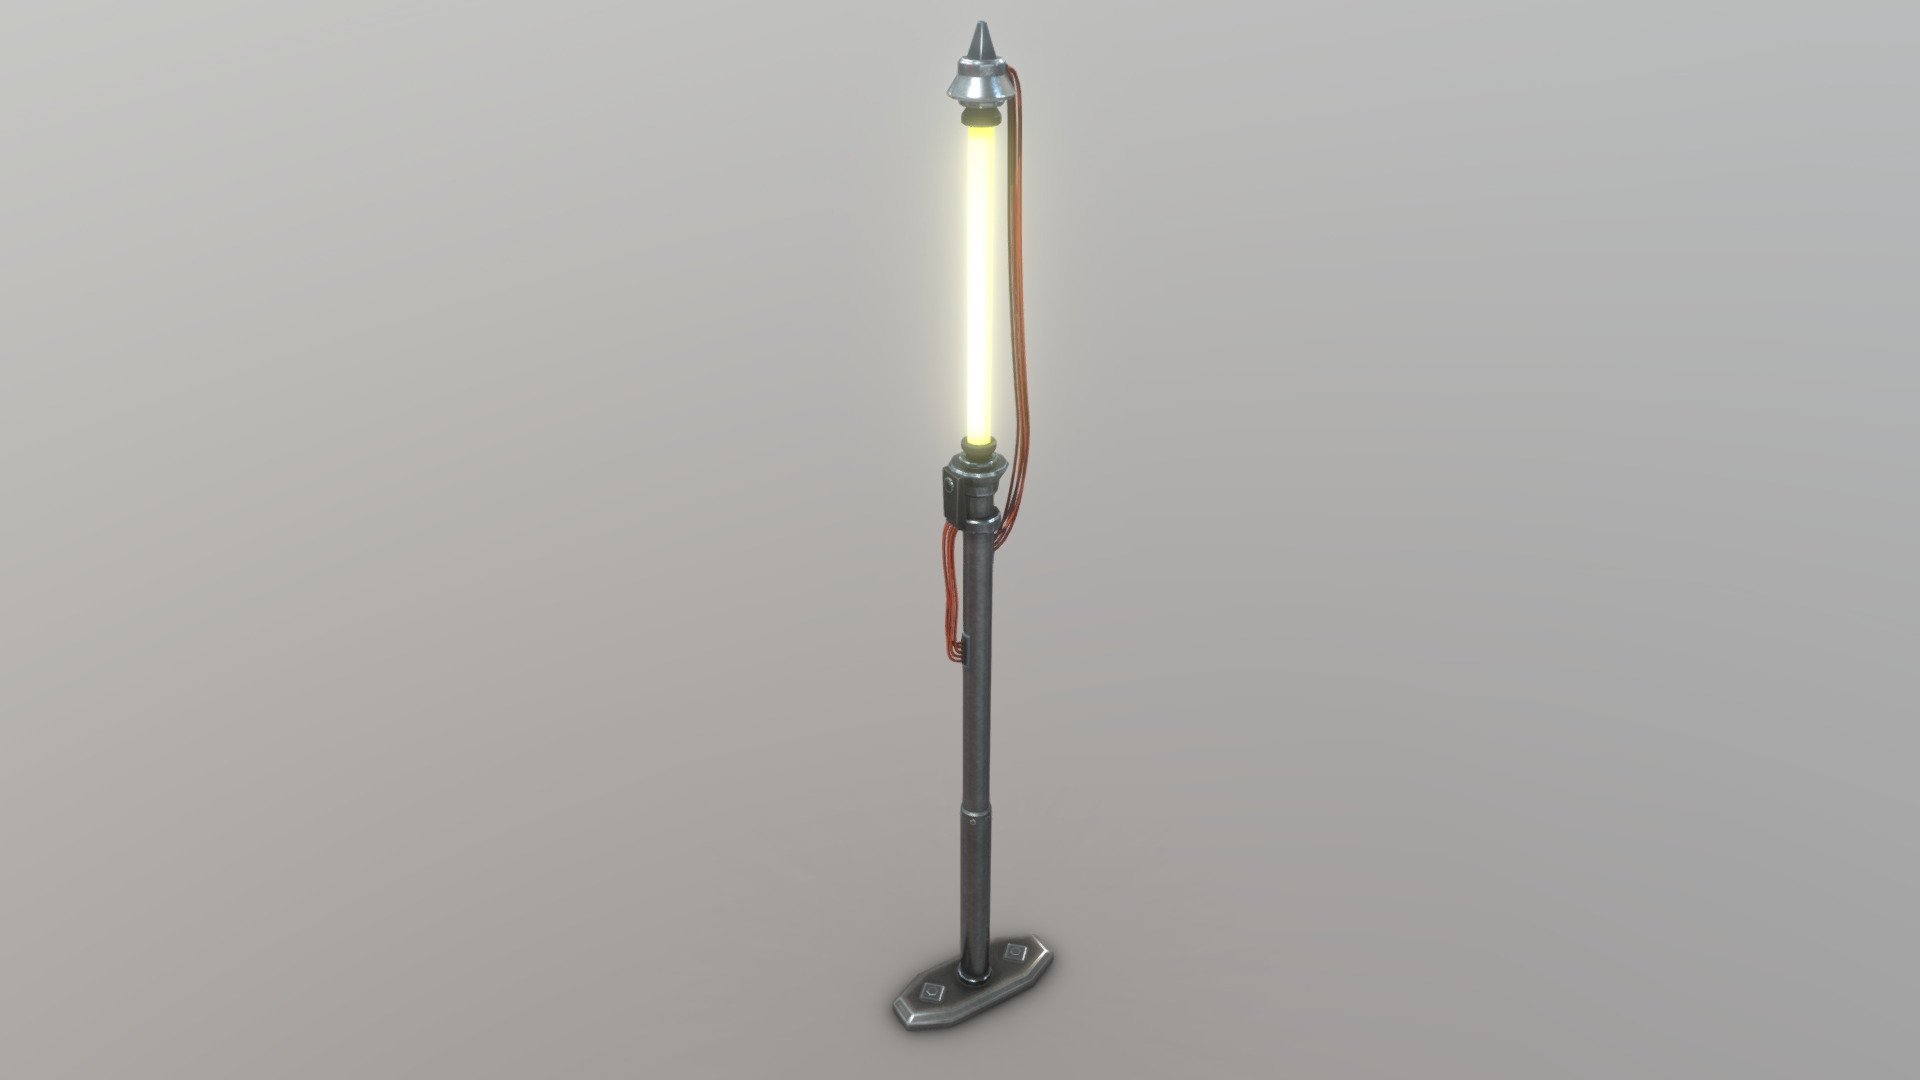 Kenshi like/inspired lamp

I made this 3D model and unwarped it in Blender and textured it in Substance Painter.

Inspired by lamps from Kenshi game universe 3d model